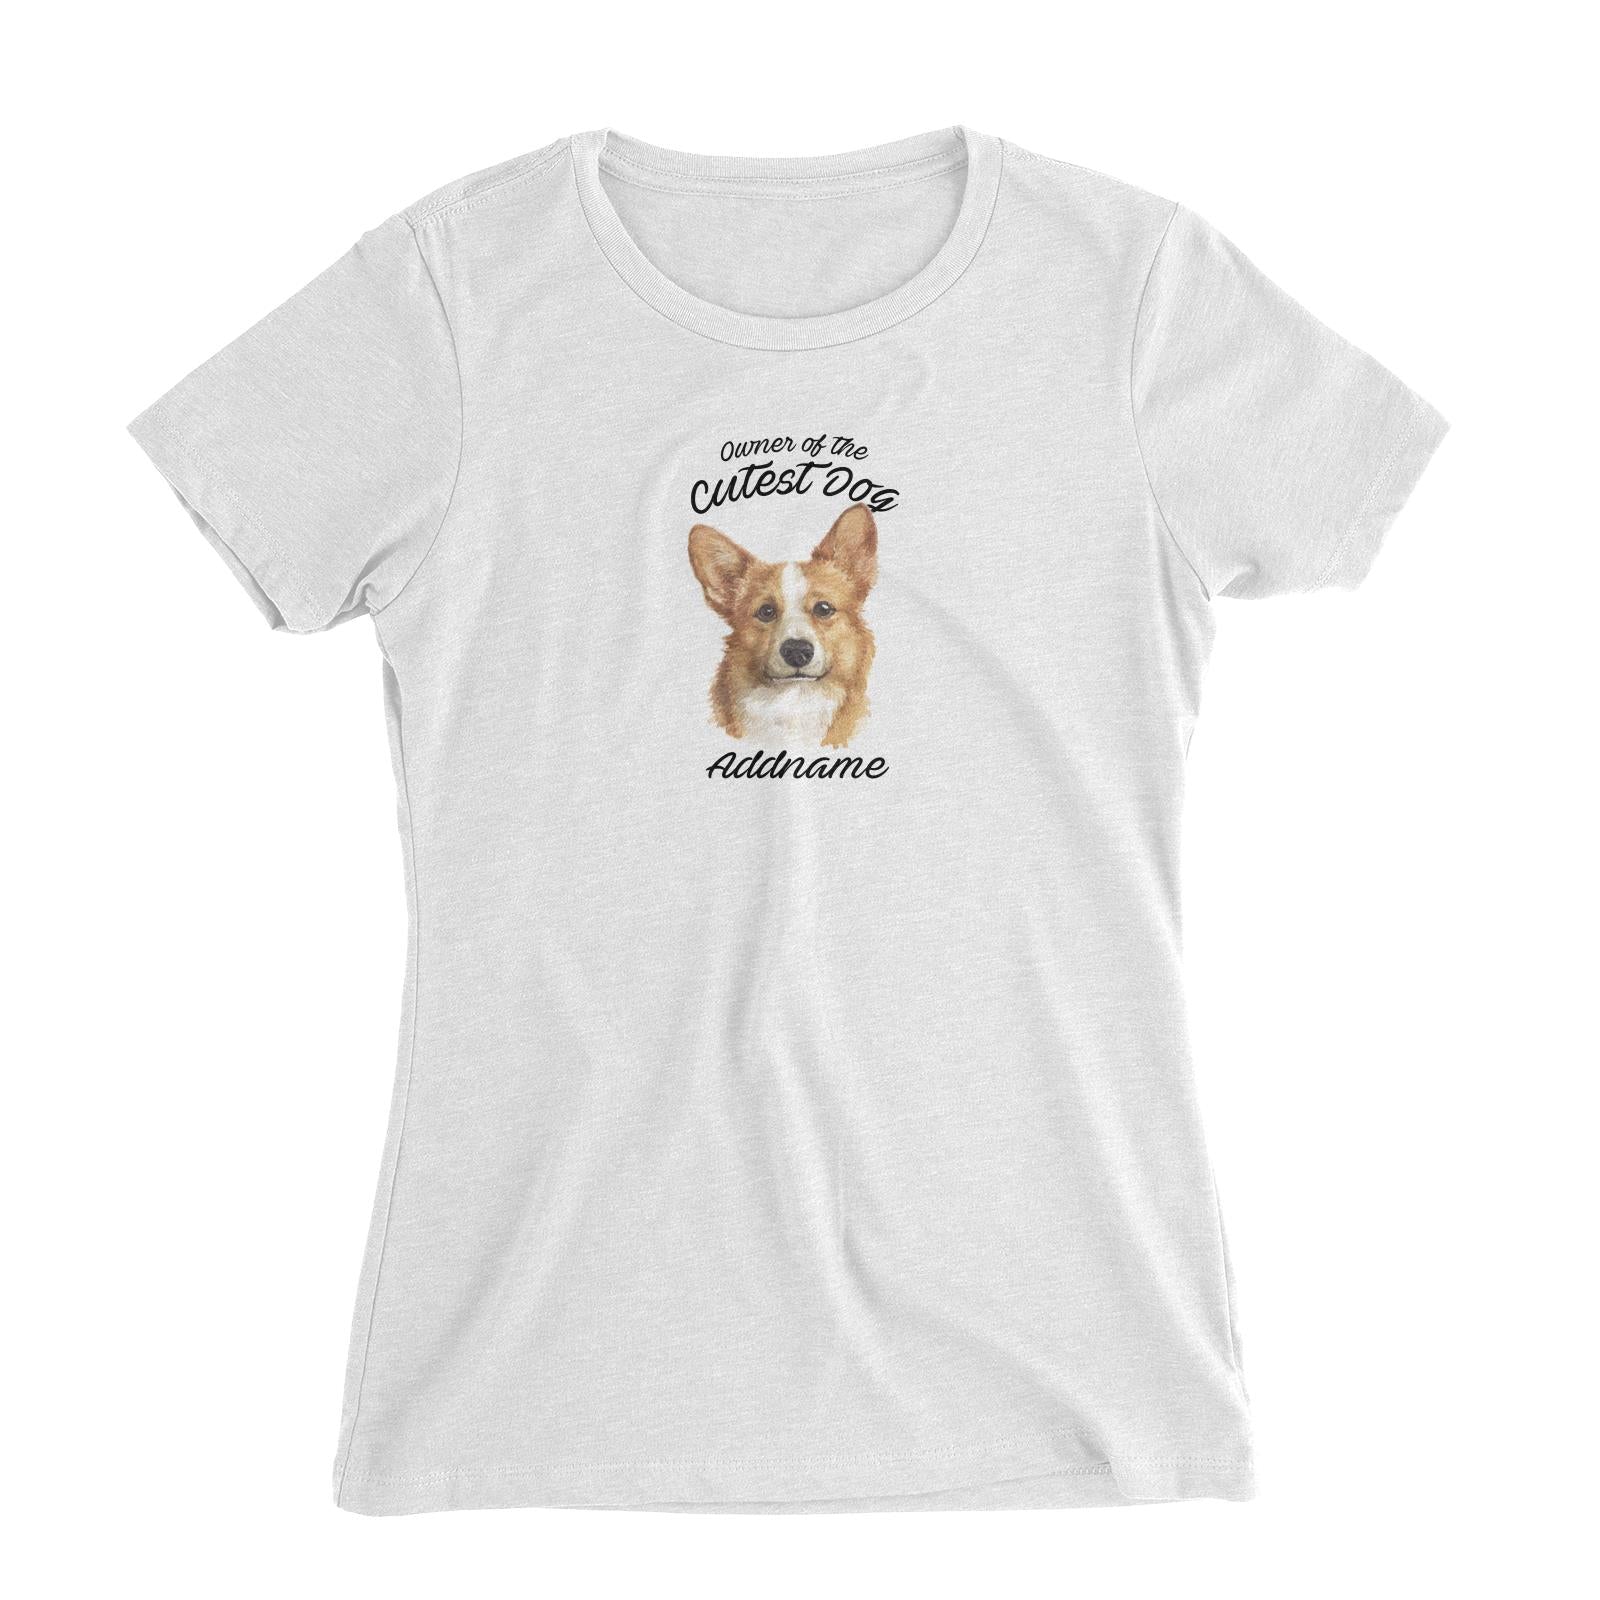 Watercolor Dog Owner Of The Cutest Dog Welsh Corgi Addname Women's Slim Fit T-Shirt